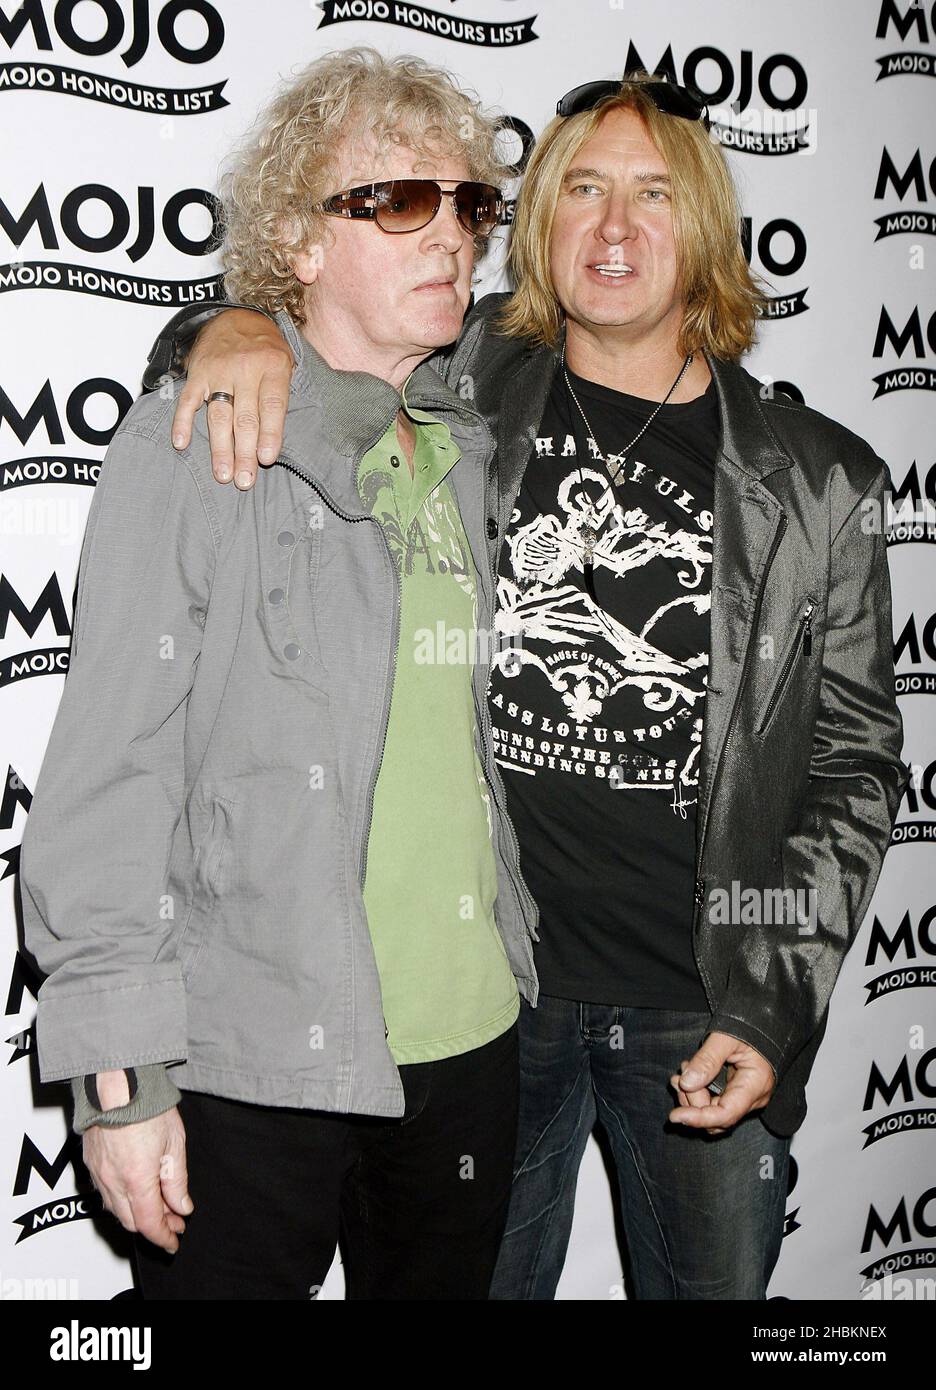 Ian Hunter of Mott The Hoople and Joe Elliott of Def Leppard at the MOJO Awards at The Brewery in London. Stock Photo